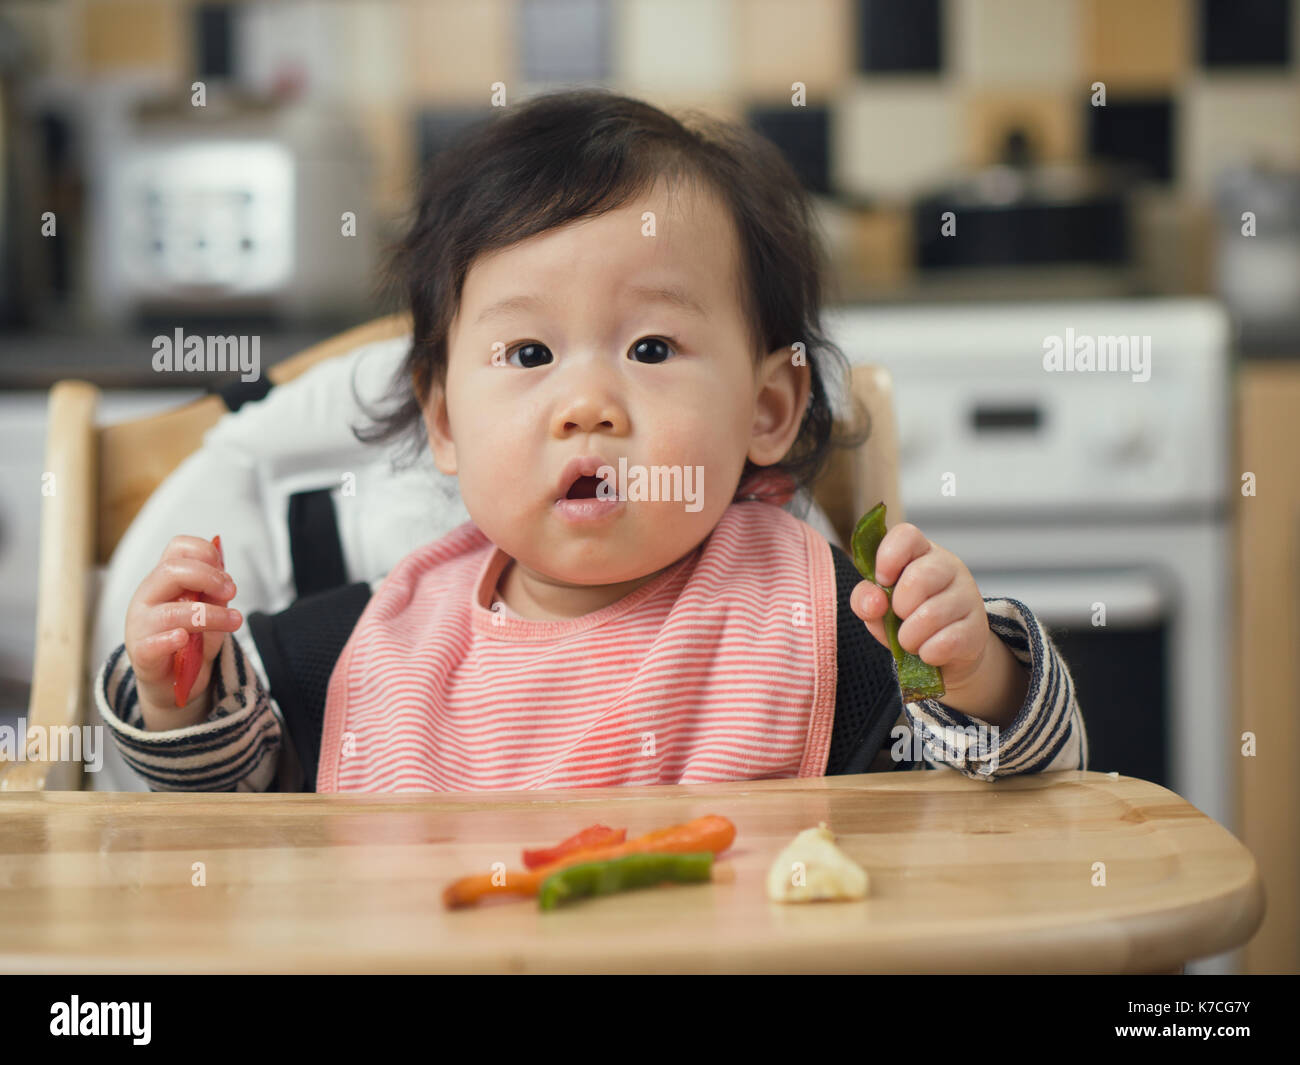 https://c8.alamy.com/comp/K7CG7Y/asian-baby-girl-eating-roasted-vegetable-at-home-kitchen-K7CG7Y.jpg